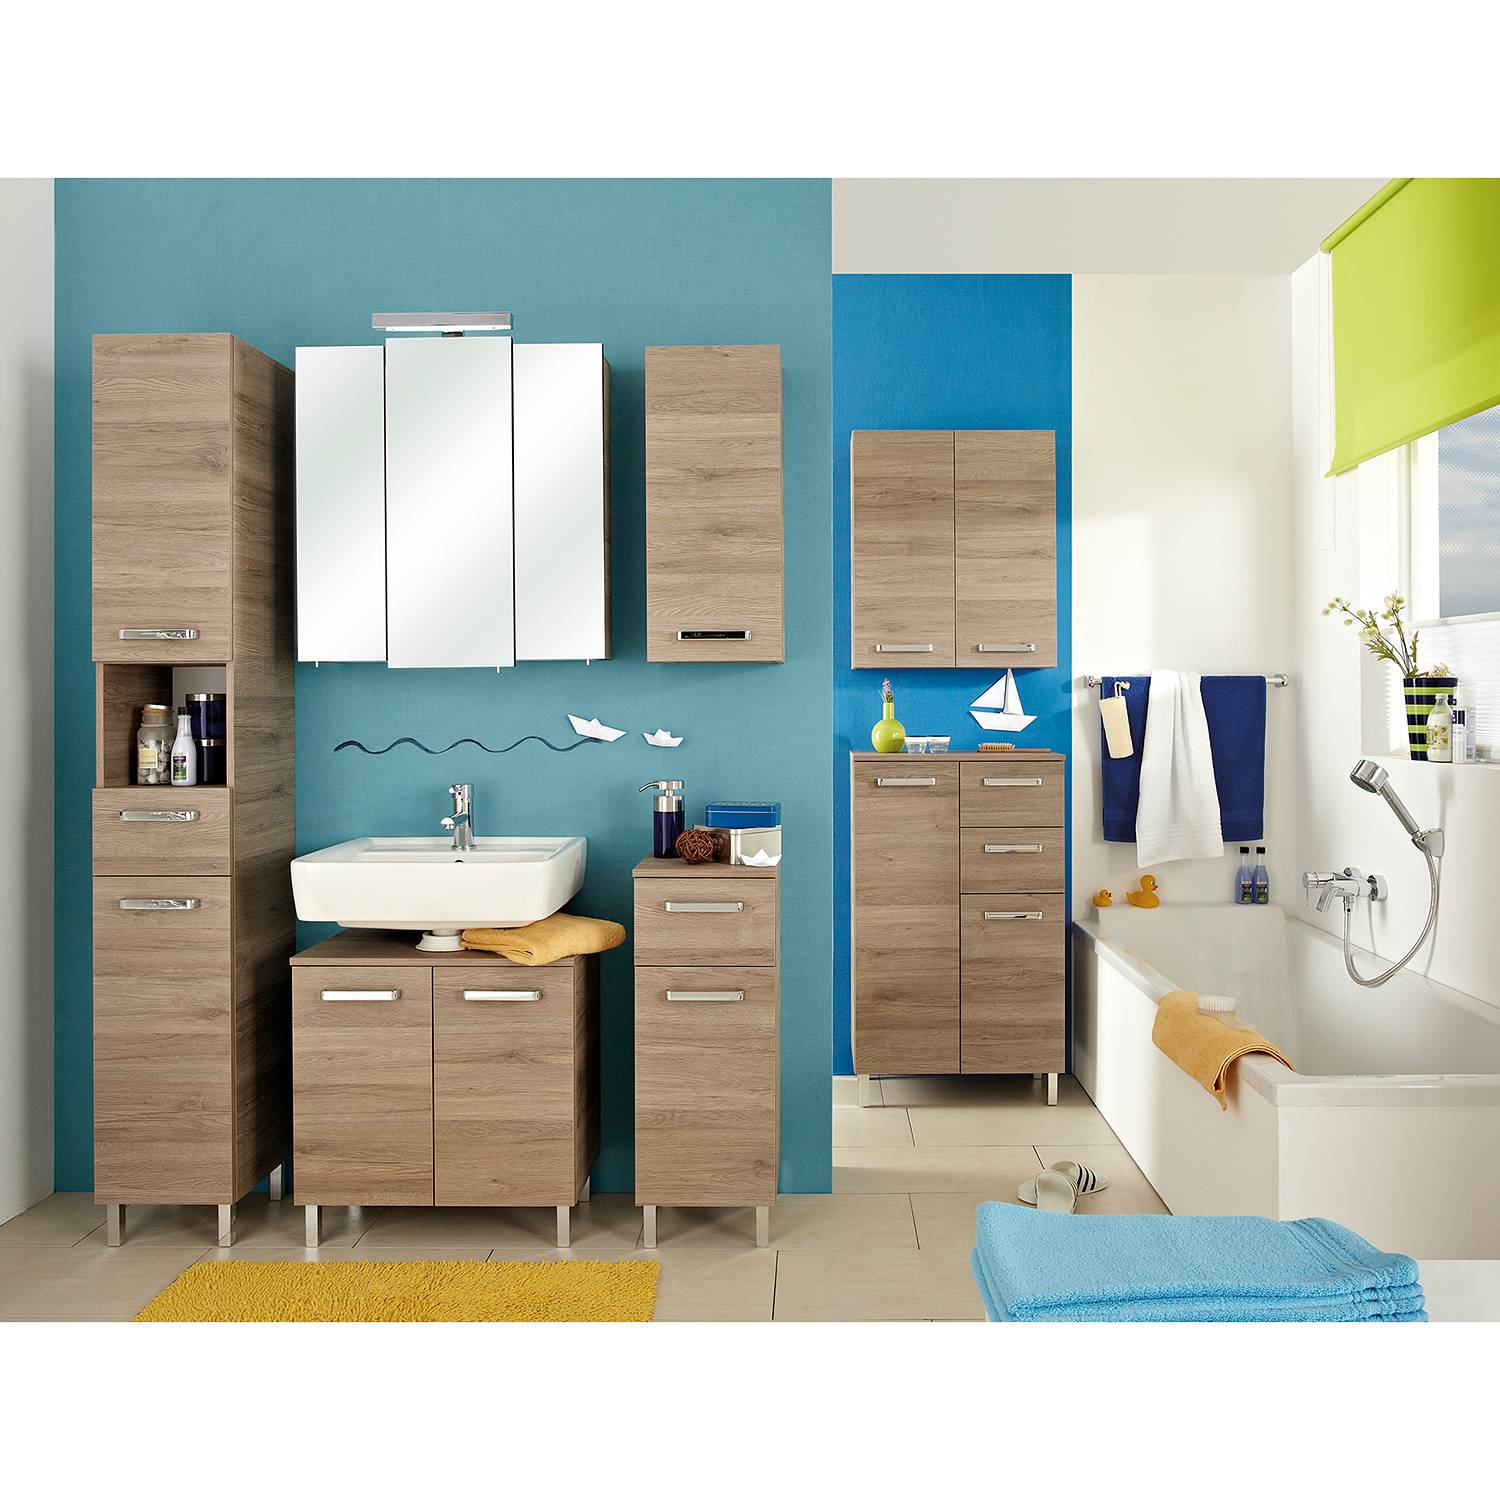 Image of Armoire basse Offenbach 000000001000121187